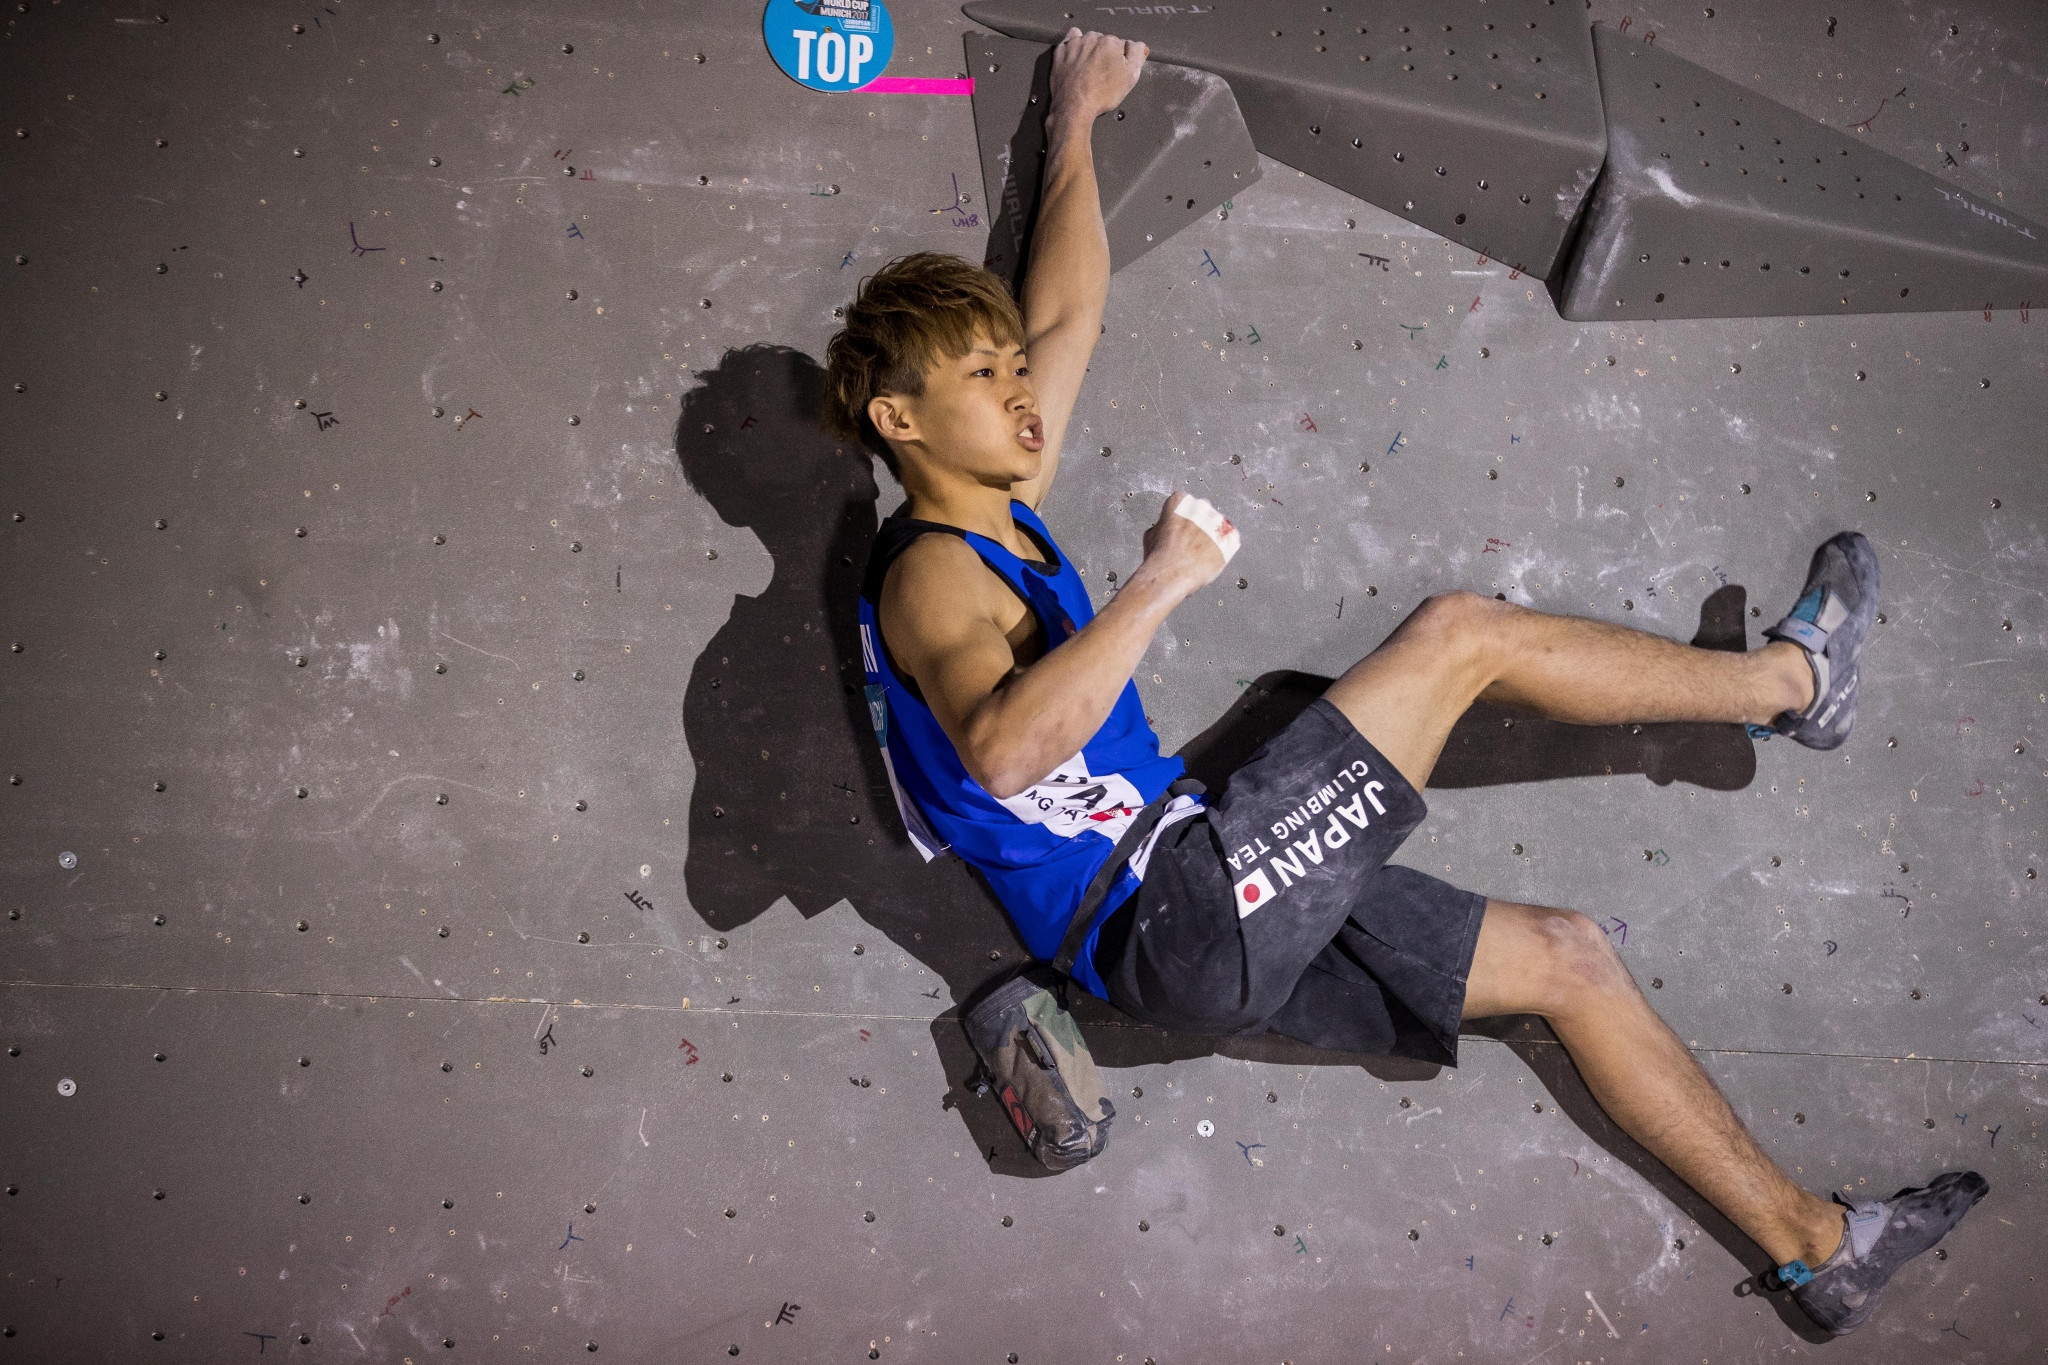 Climbing will make its Olympic debut at Tokyo 2020 ©Getty Images